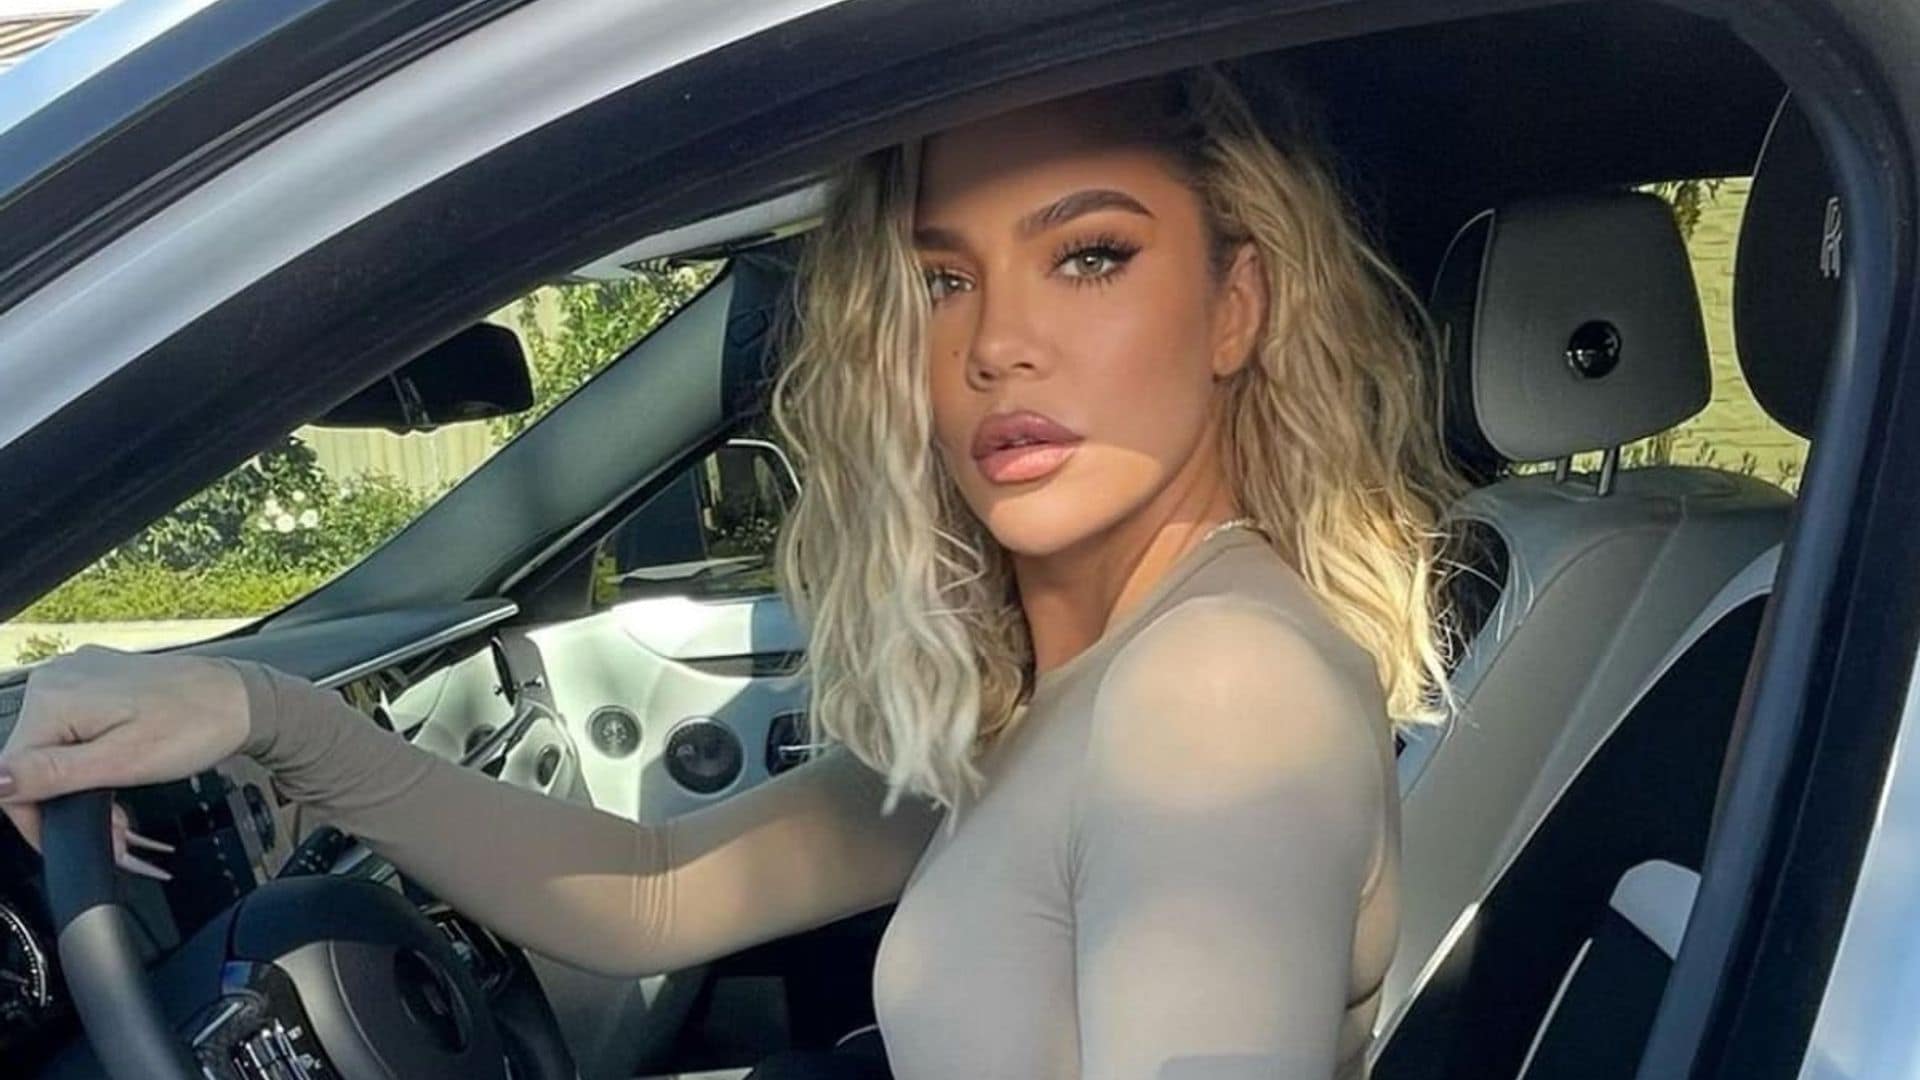 Khloé Kardashian gives lessons of self-love after social media troll criticized her hands